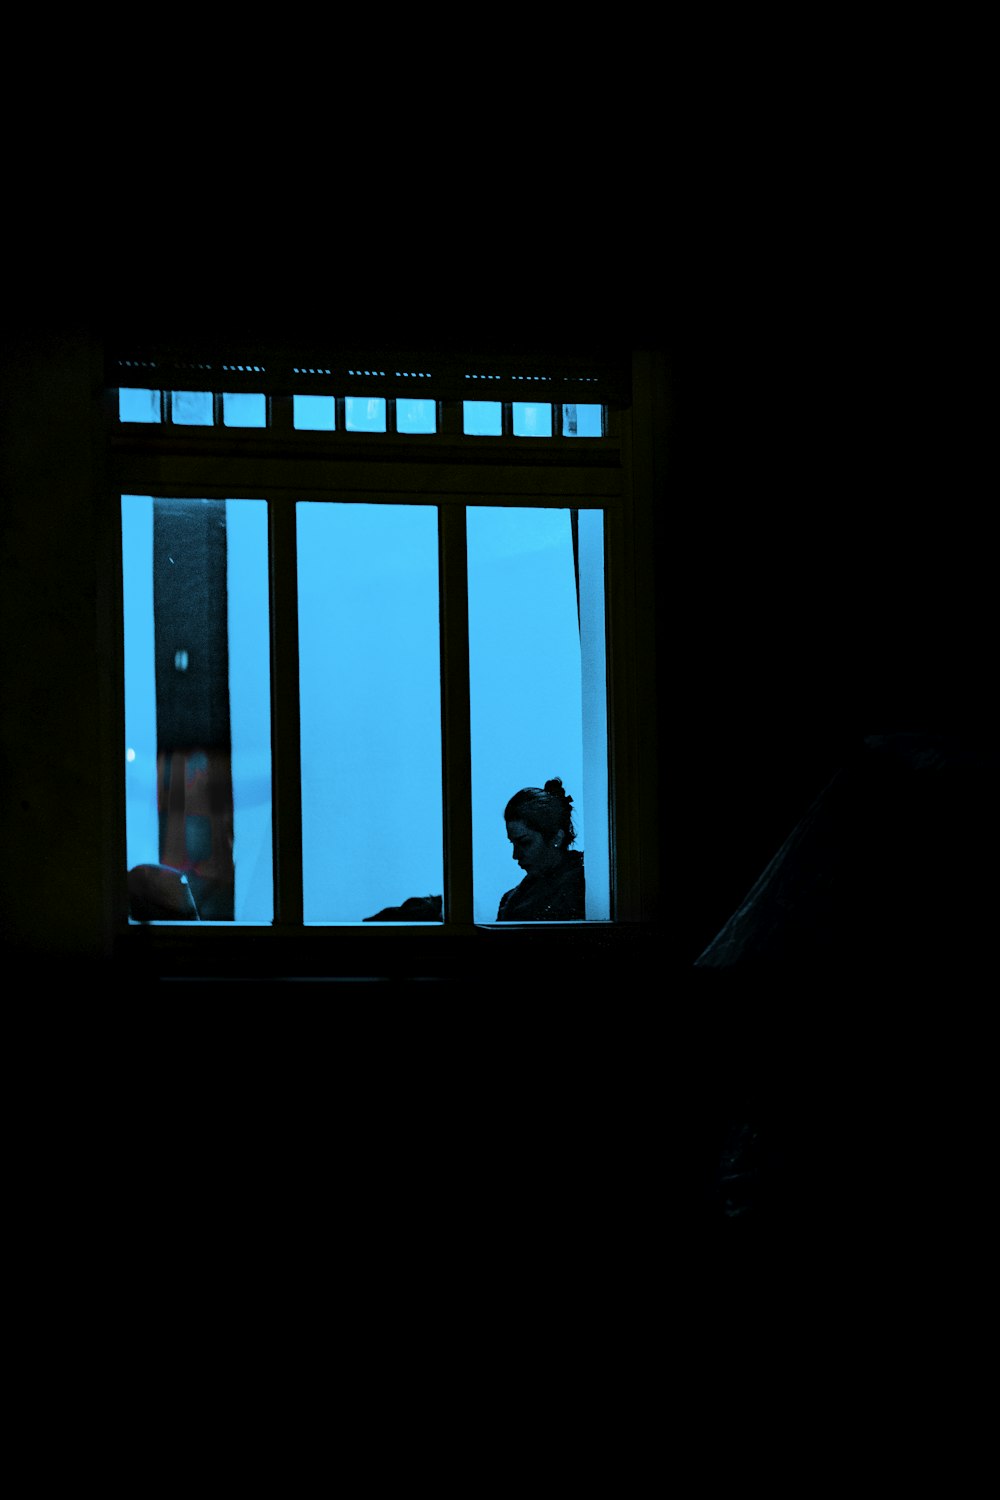 silhouette of man and woman standing in front of window during daytime